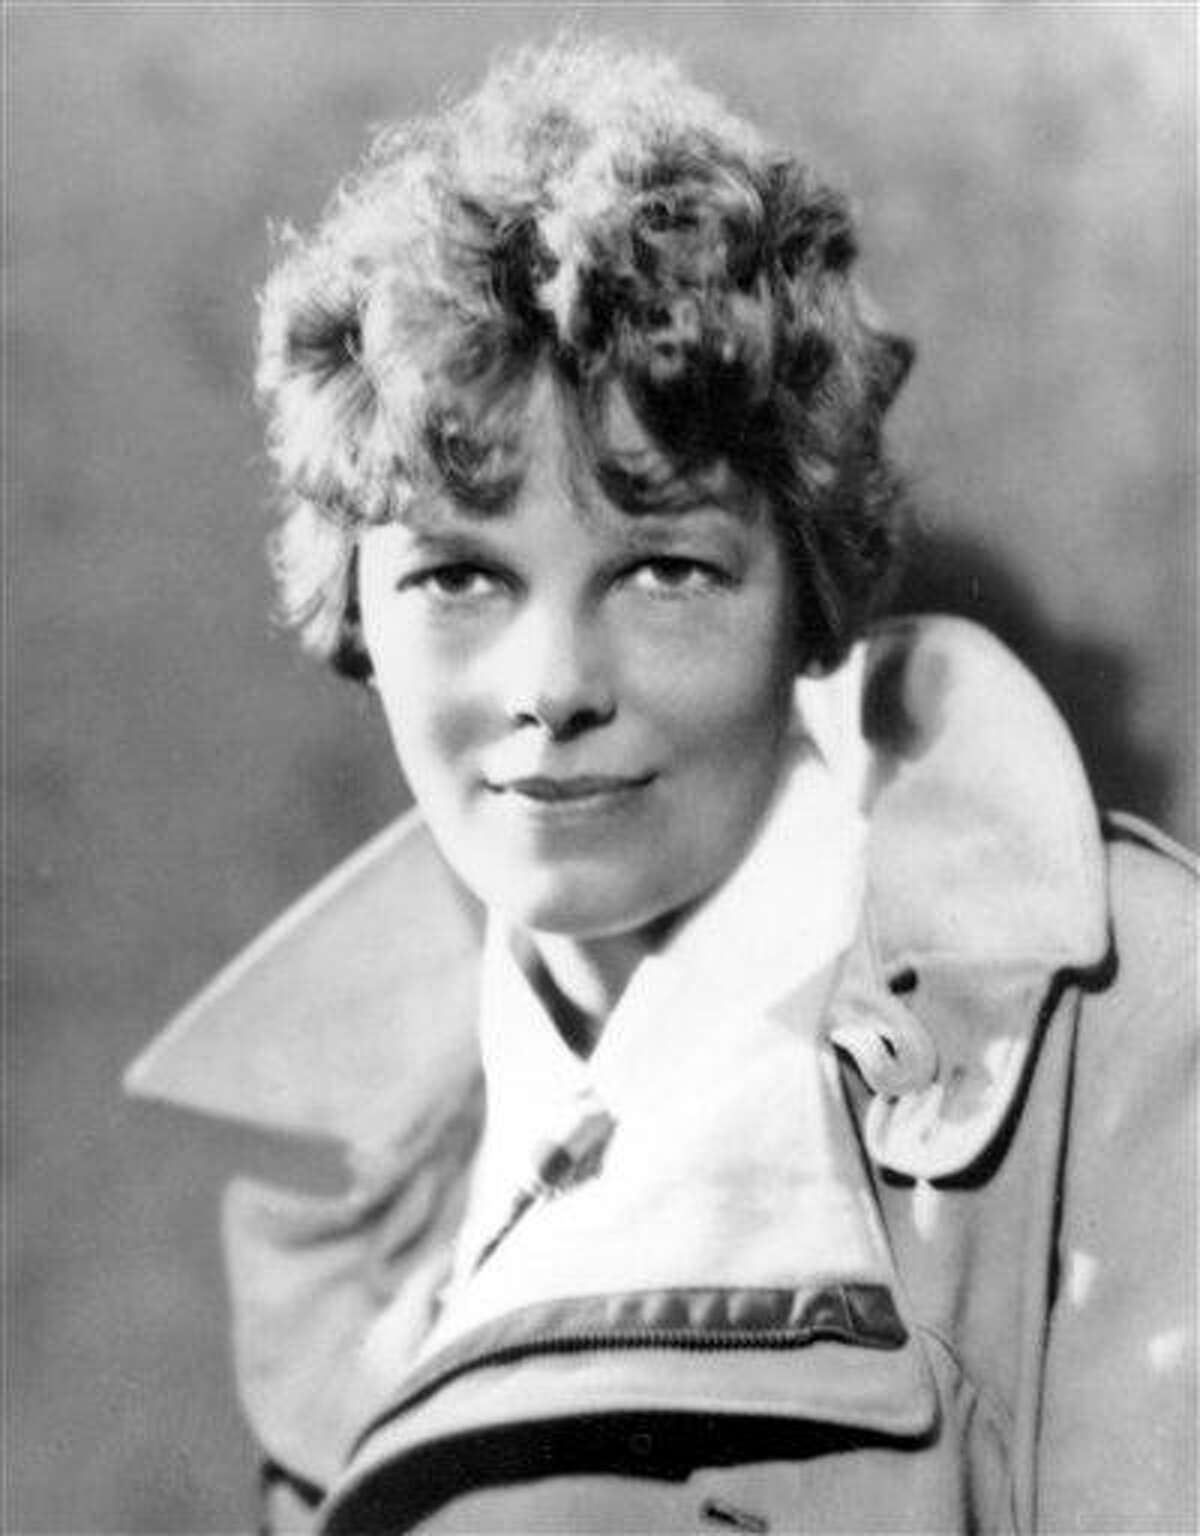 An undated file photo shows American aviatrix Amelia Earhart. A $2.2 million expedition is hoping to finally solve one of America's most enduring mysteries: What happened to Earhart when she went missing over the South Pacific 75 years ago? Associated Press